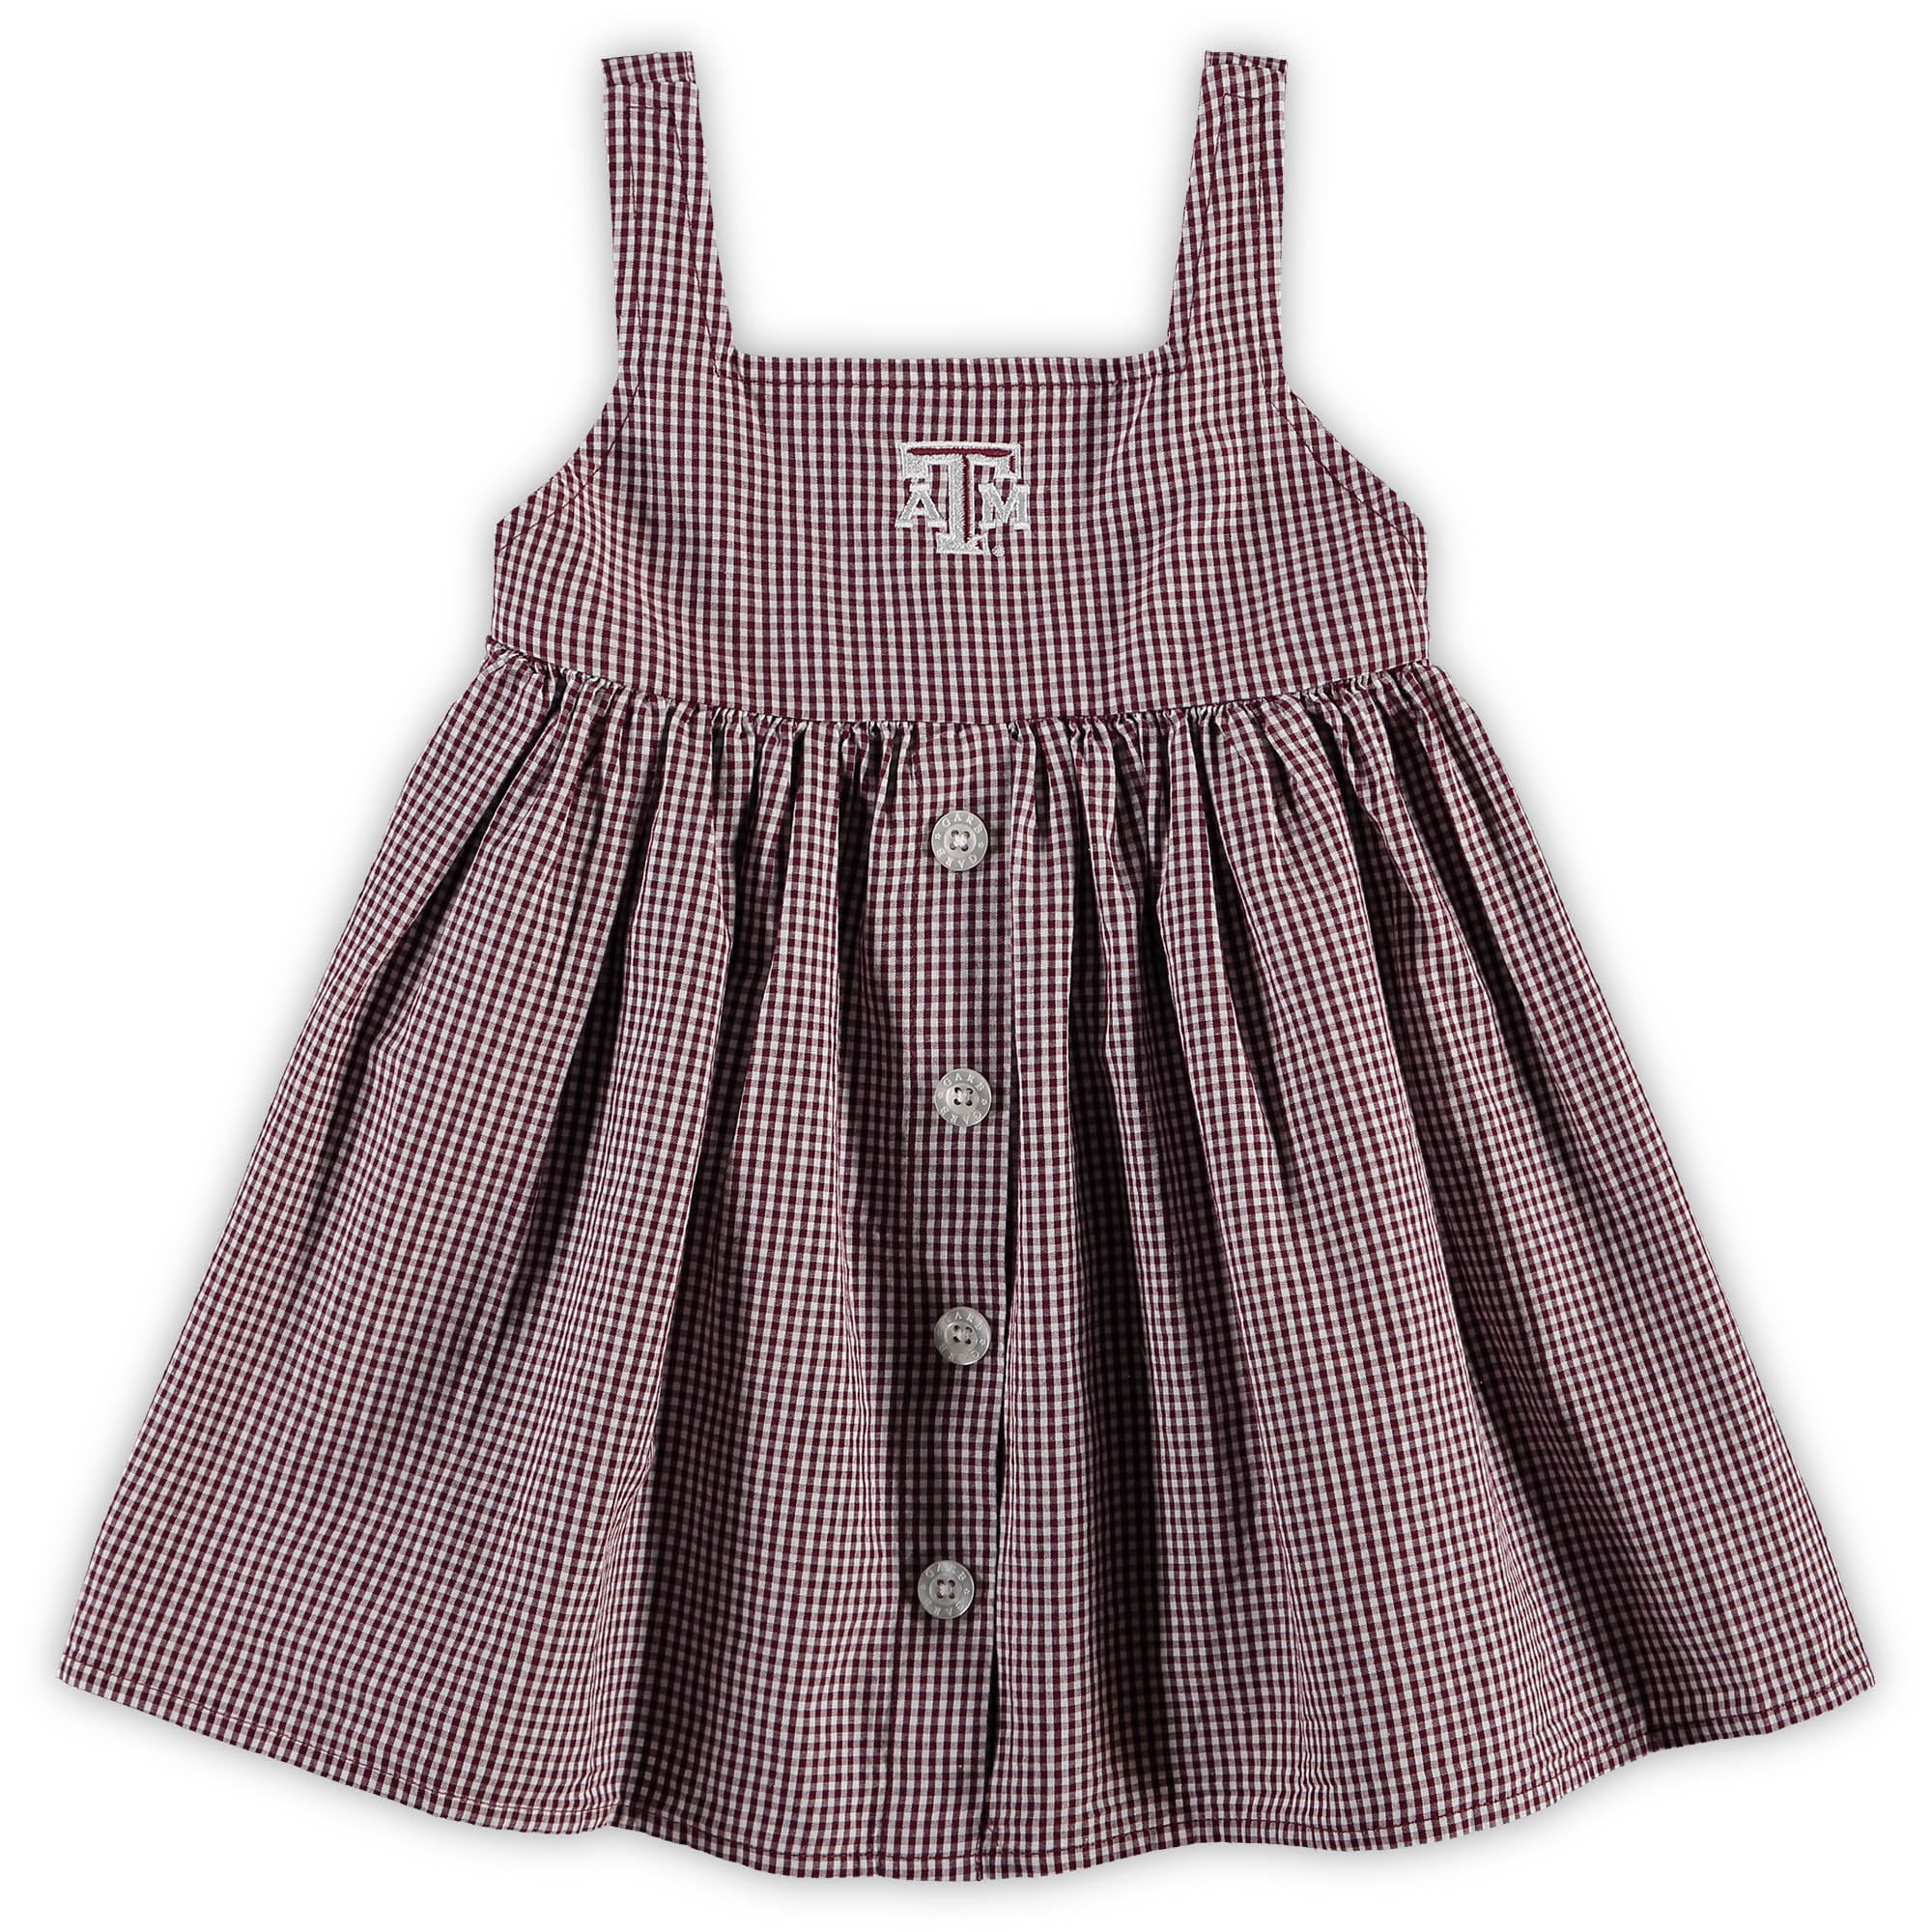 A&M Aggies Inspired Dress Baby boutique dresses baby girl dresses